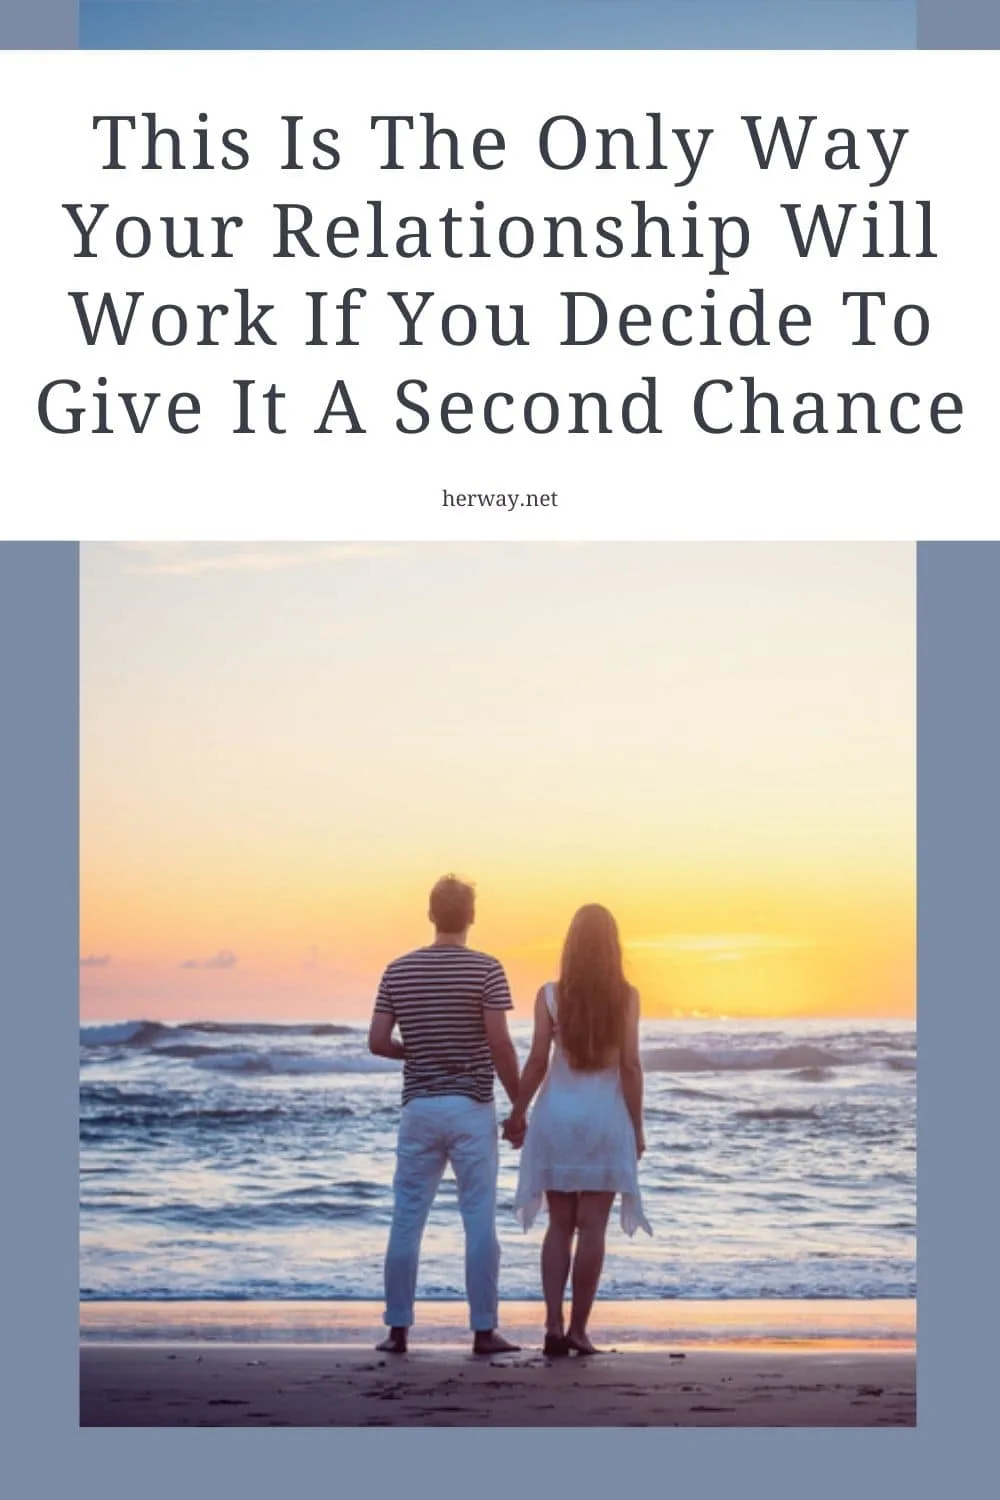 This Is The Only Way Your Relationship Will Work If You Decide To Give It A Second Chance